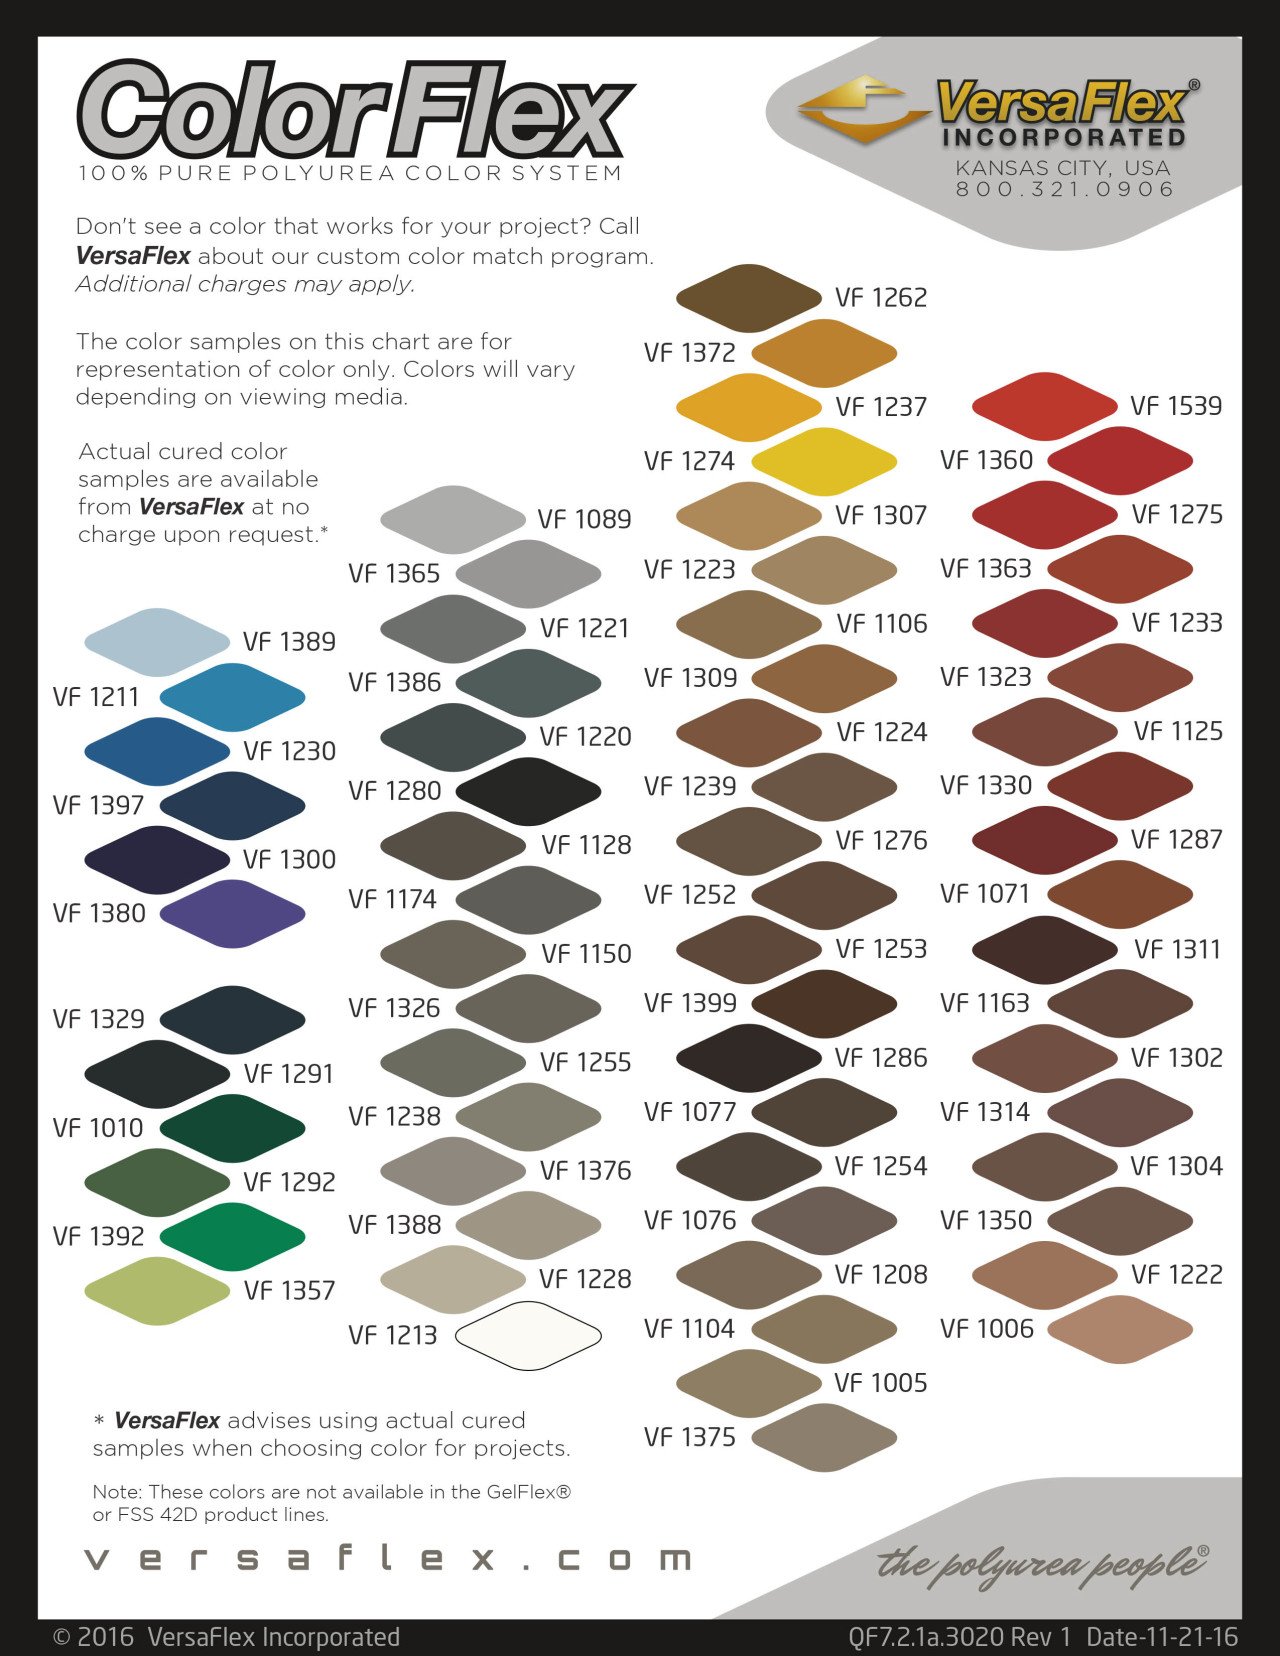 The Model Master Color Charts!